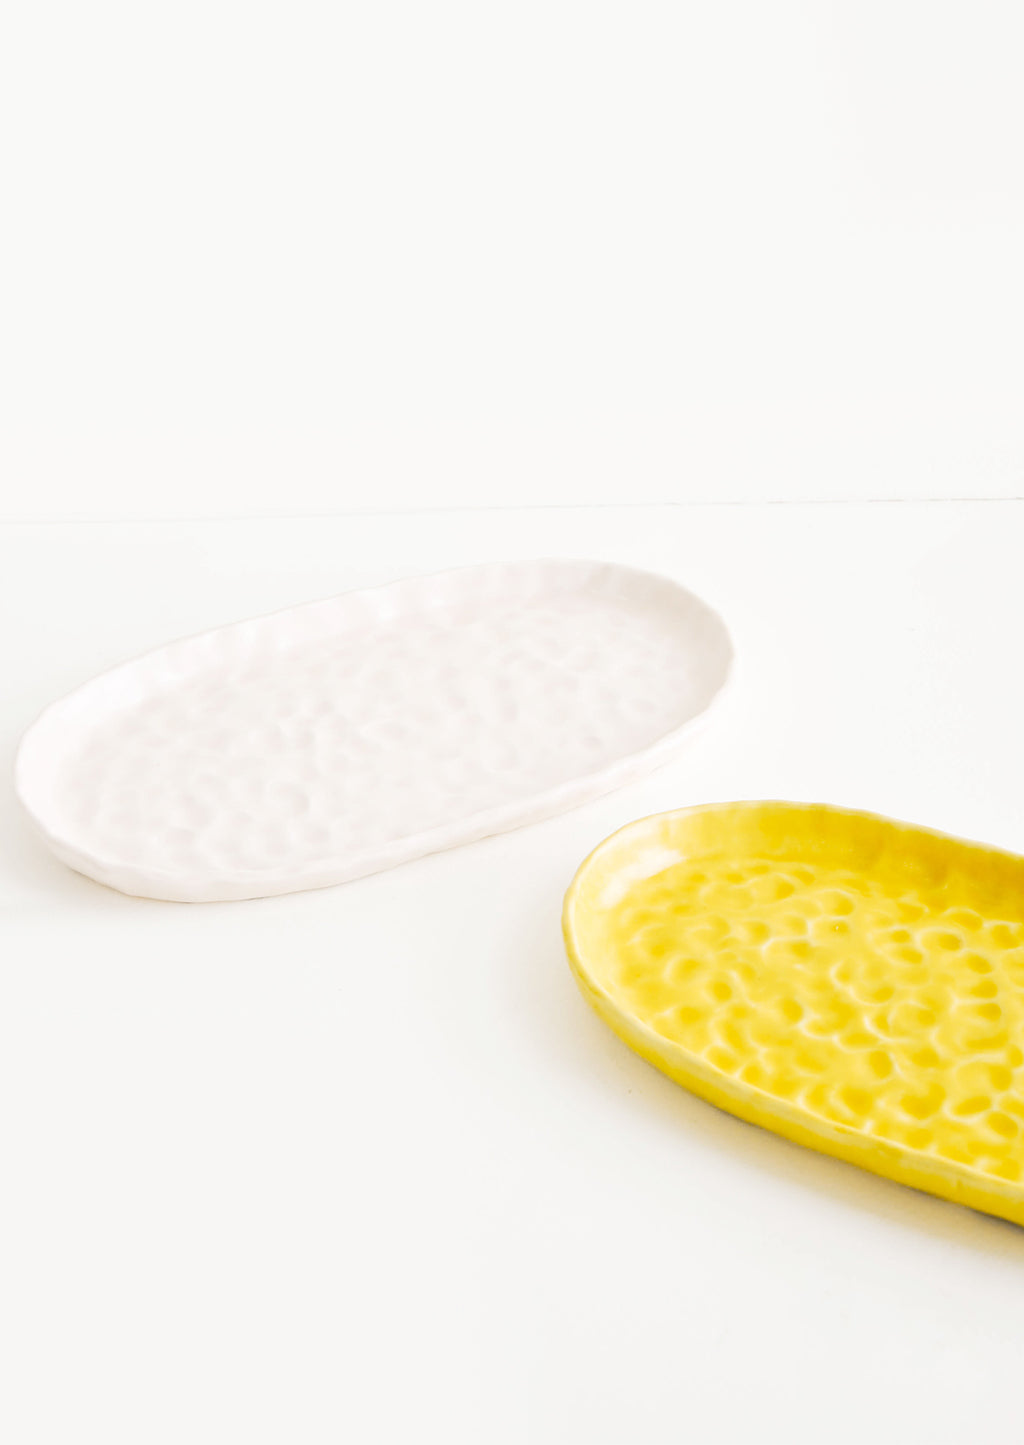 1: Dapple Textured Oval Shaped Ceramic Trays in Pink & Yellow - LEIF